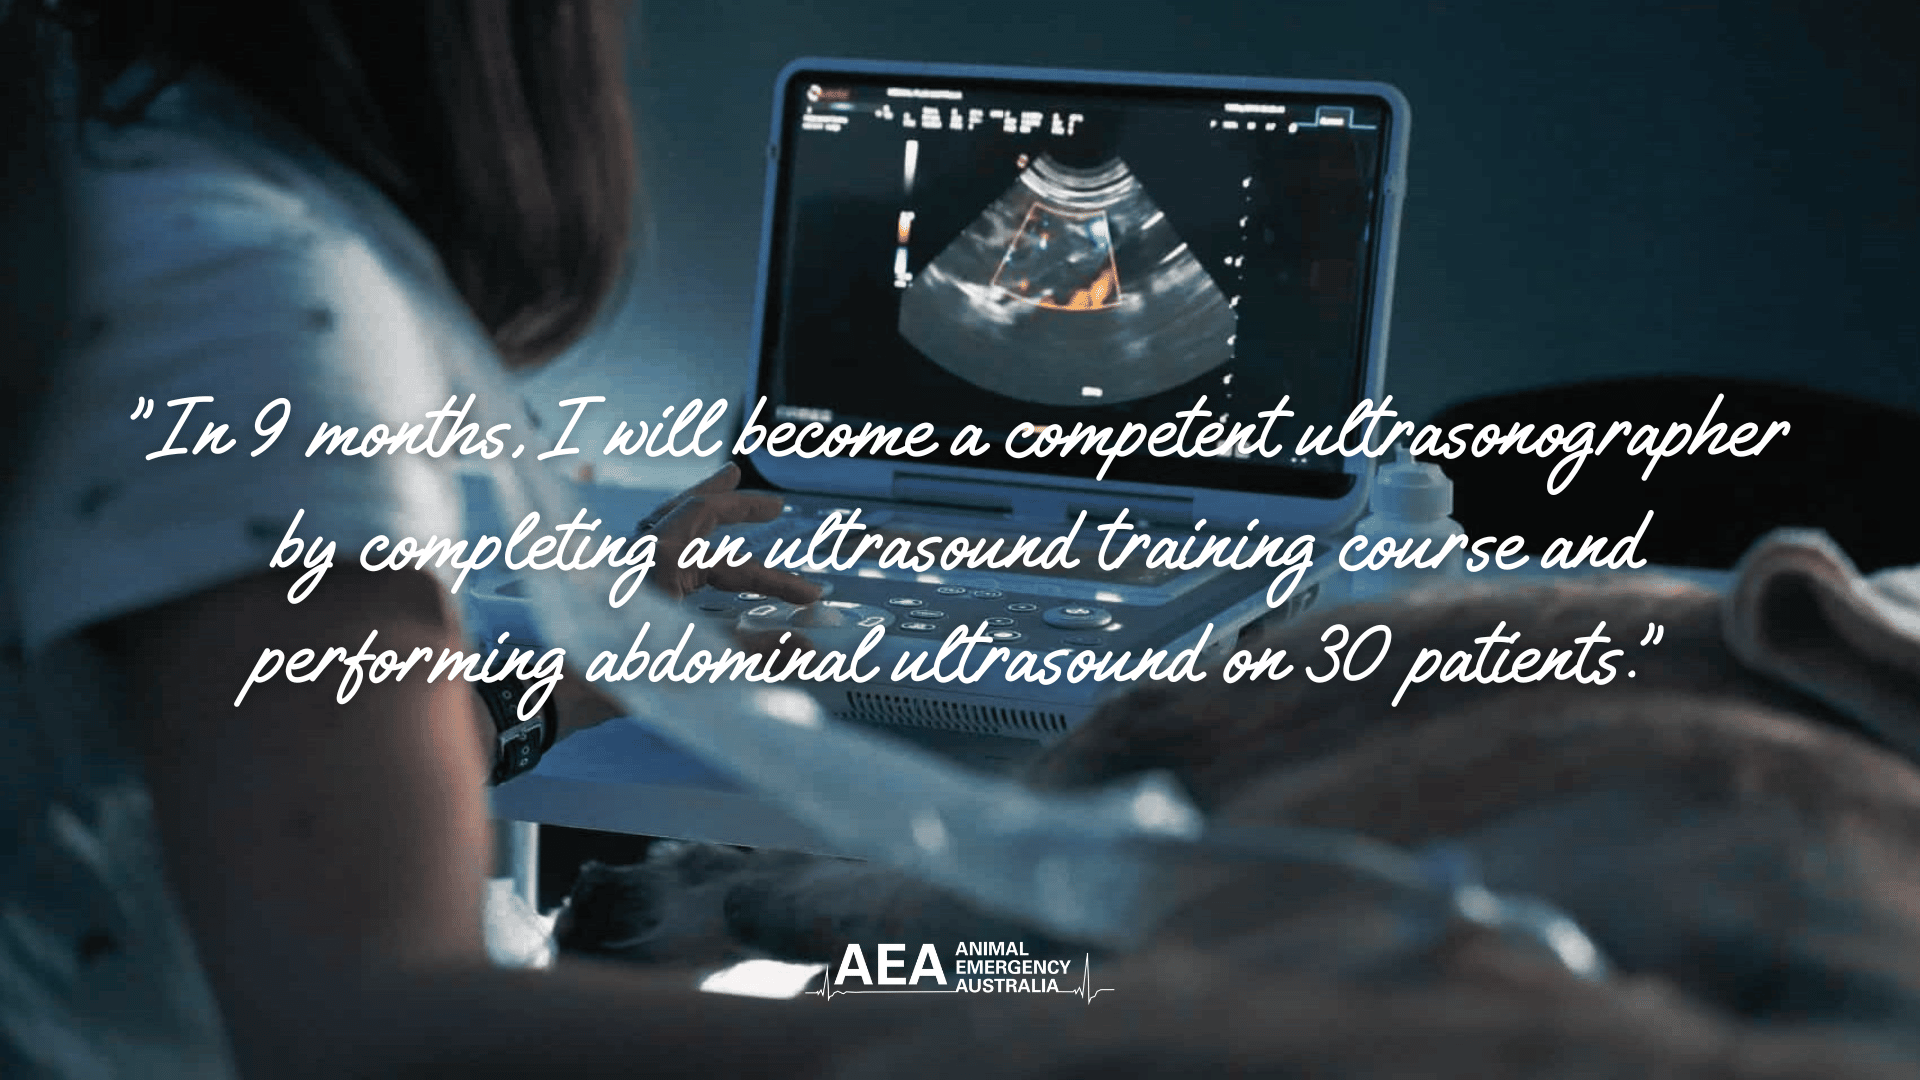 New years veterinary goals quote: “In 9 months, I will become a competent ultrasonographer by completing an ultrasound training course and performing abdominal ultrasound on 30 patients.”